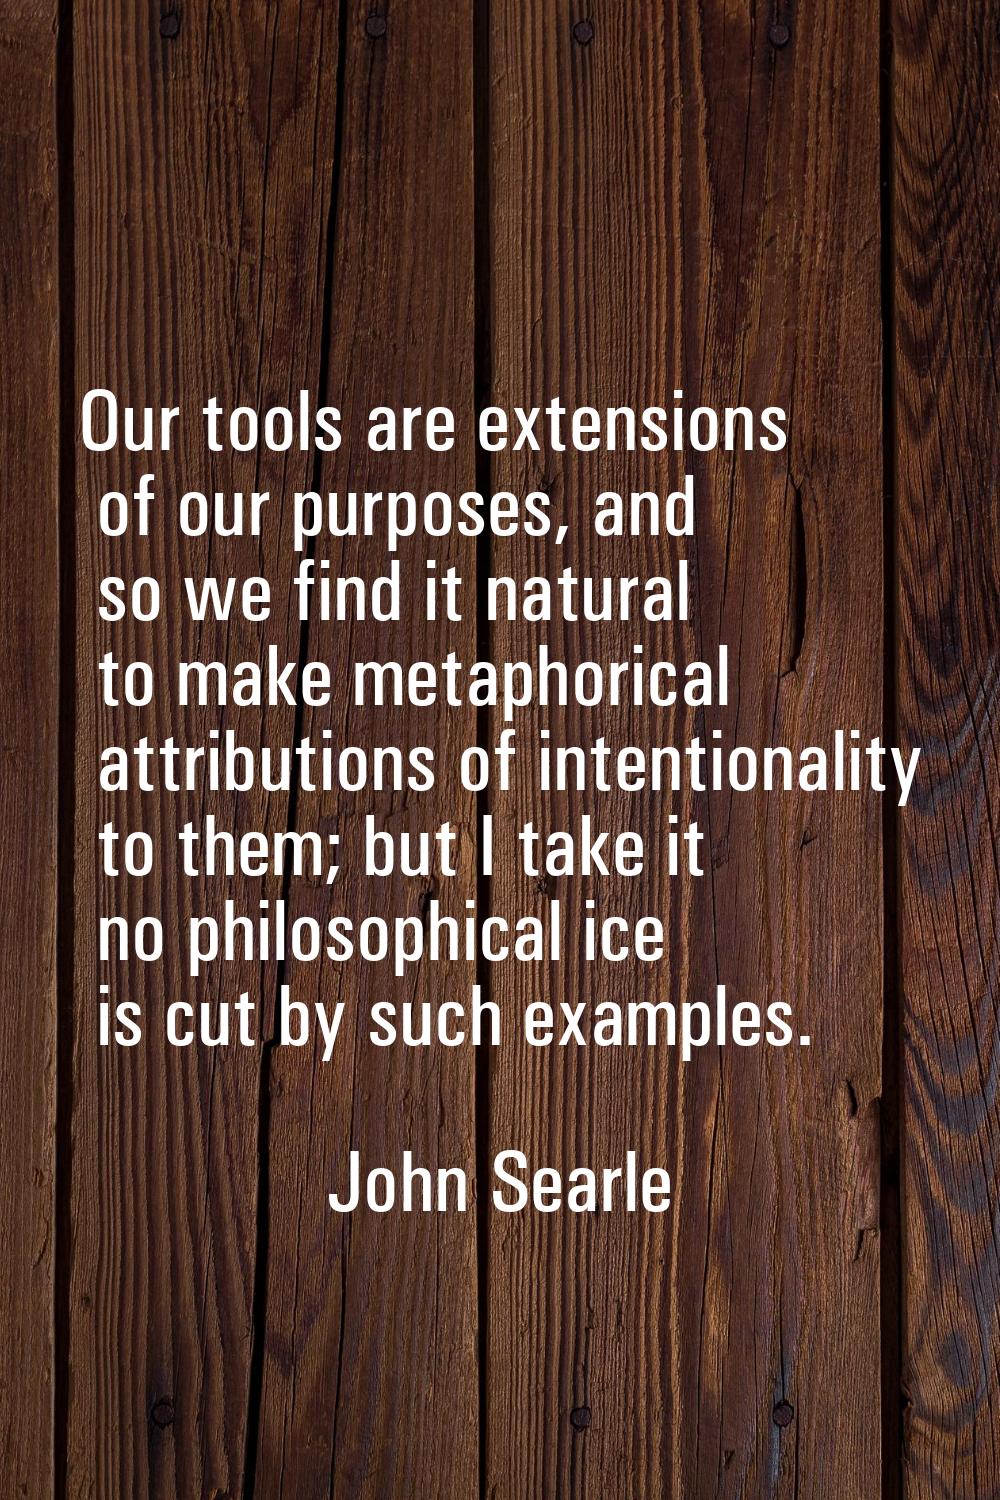 Our tools are extensions of our purposes, and so we find it natural to make metaphorical attributio